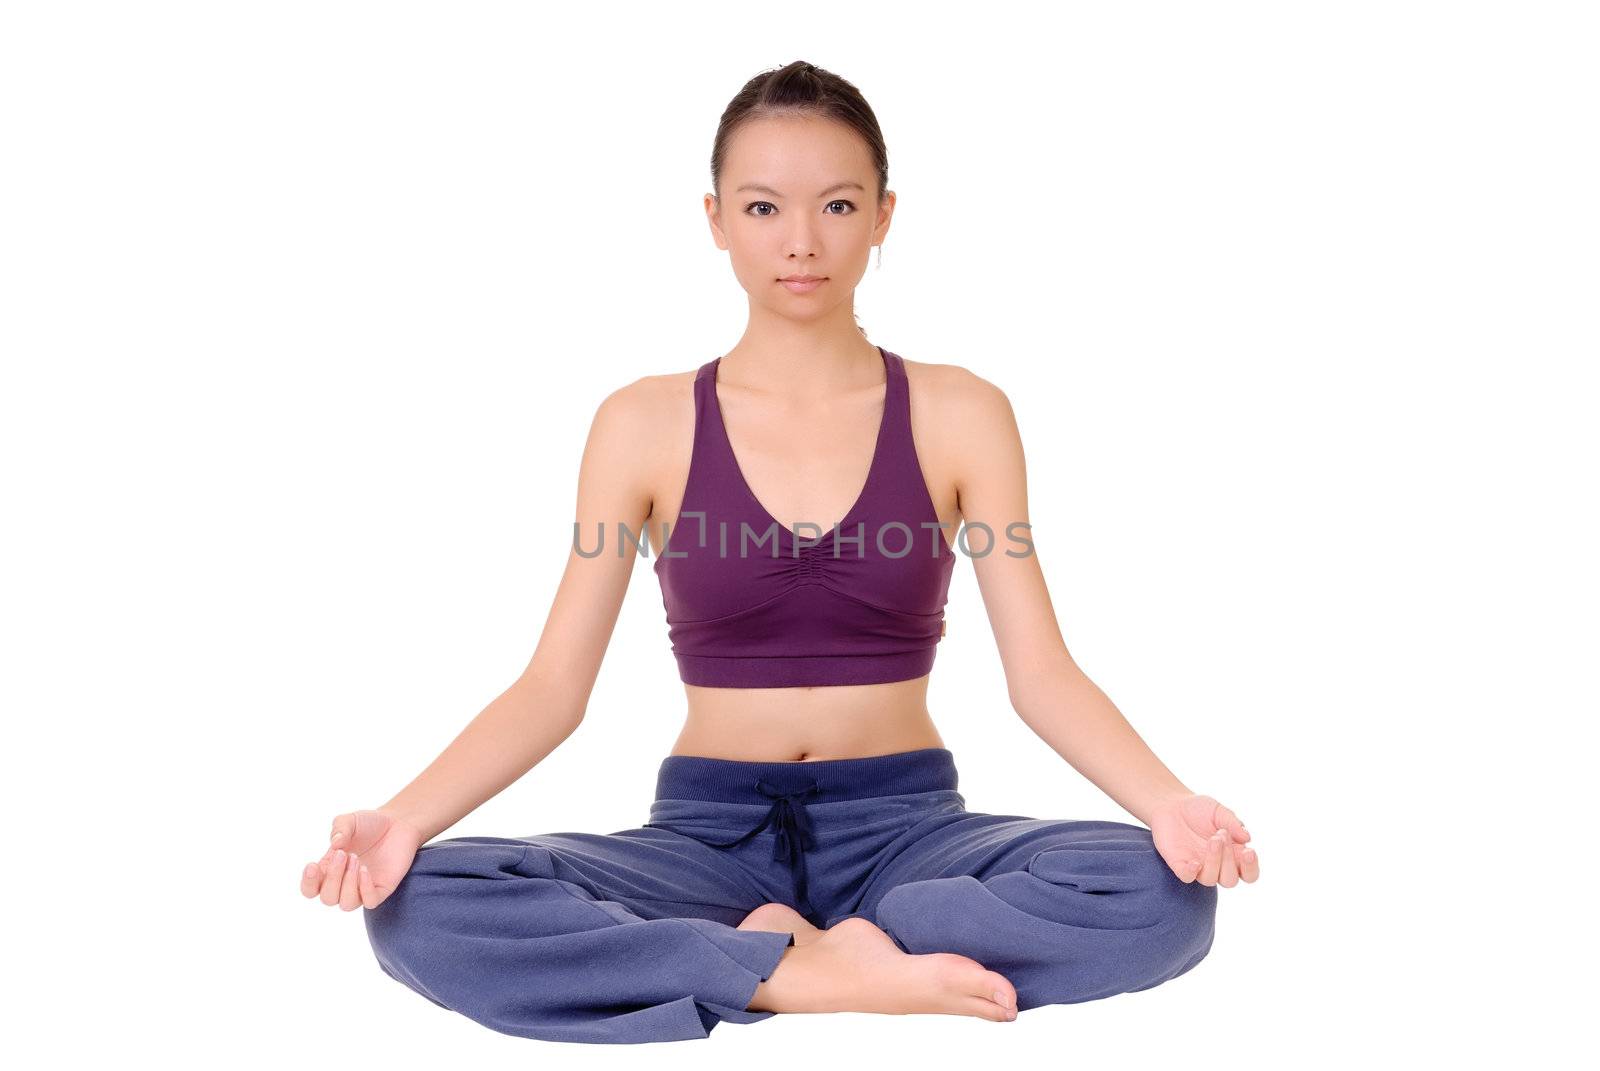 Lotus yoga pose by young Asian woman sitting on ground isolated over white.